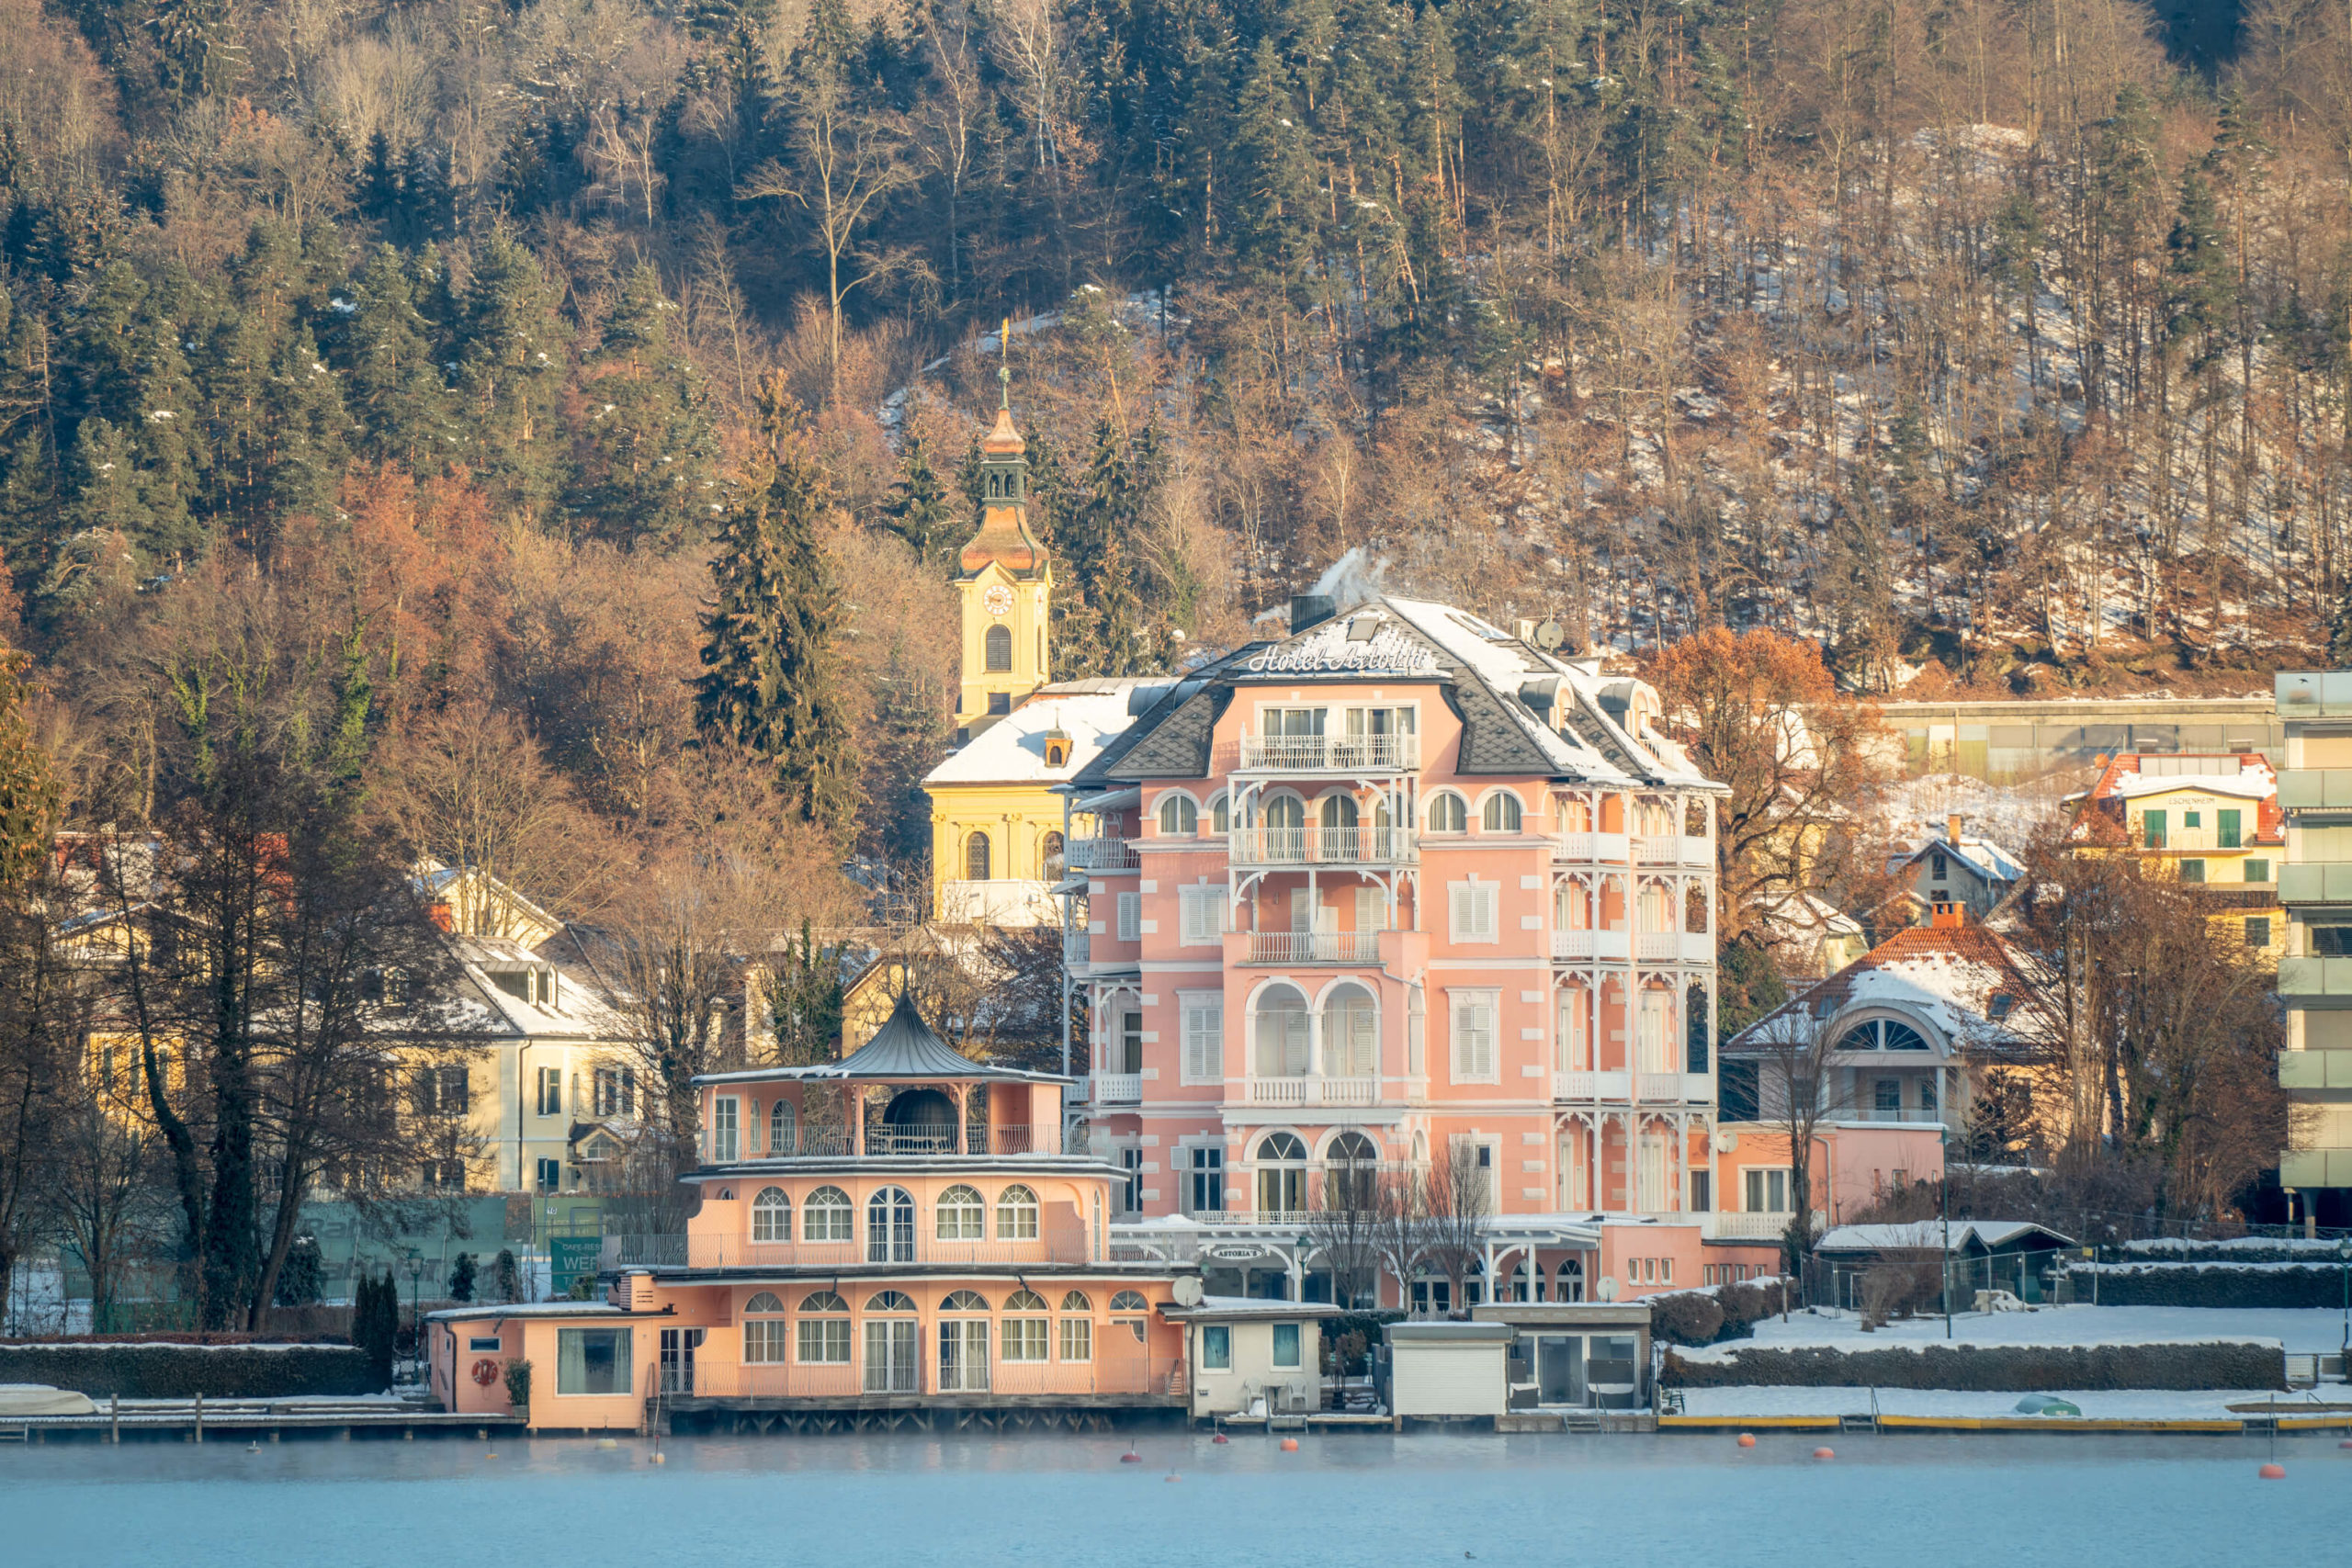 Cute pastel coloured hotels on lake Wörthersee, Carinthia